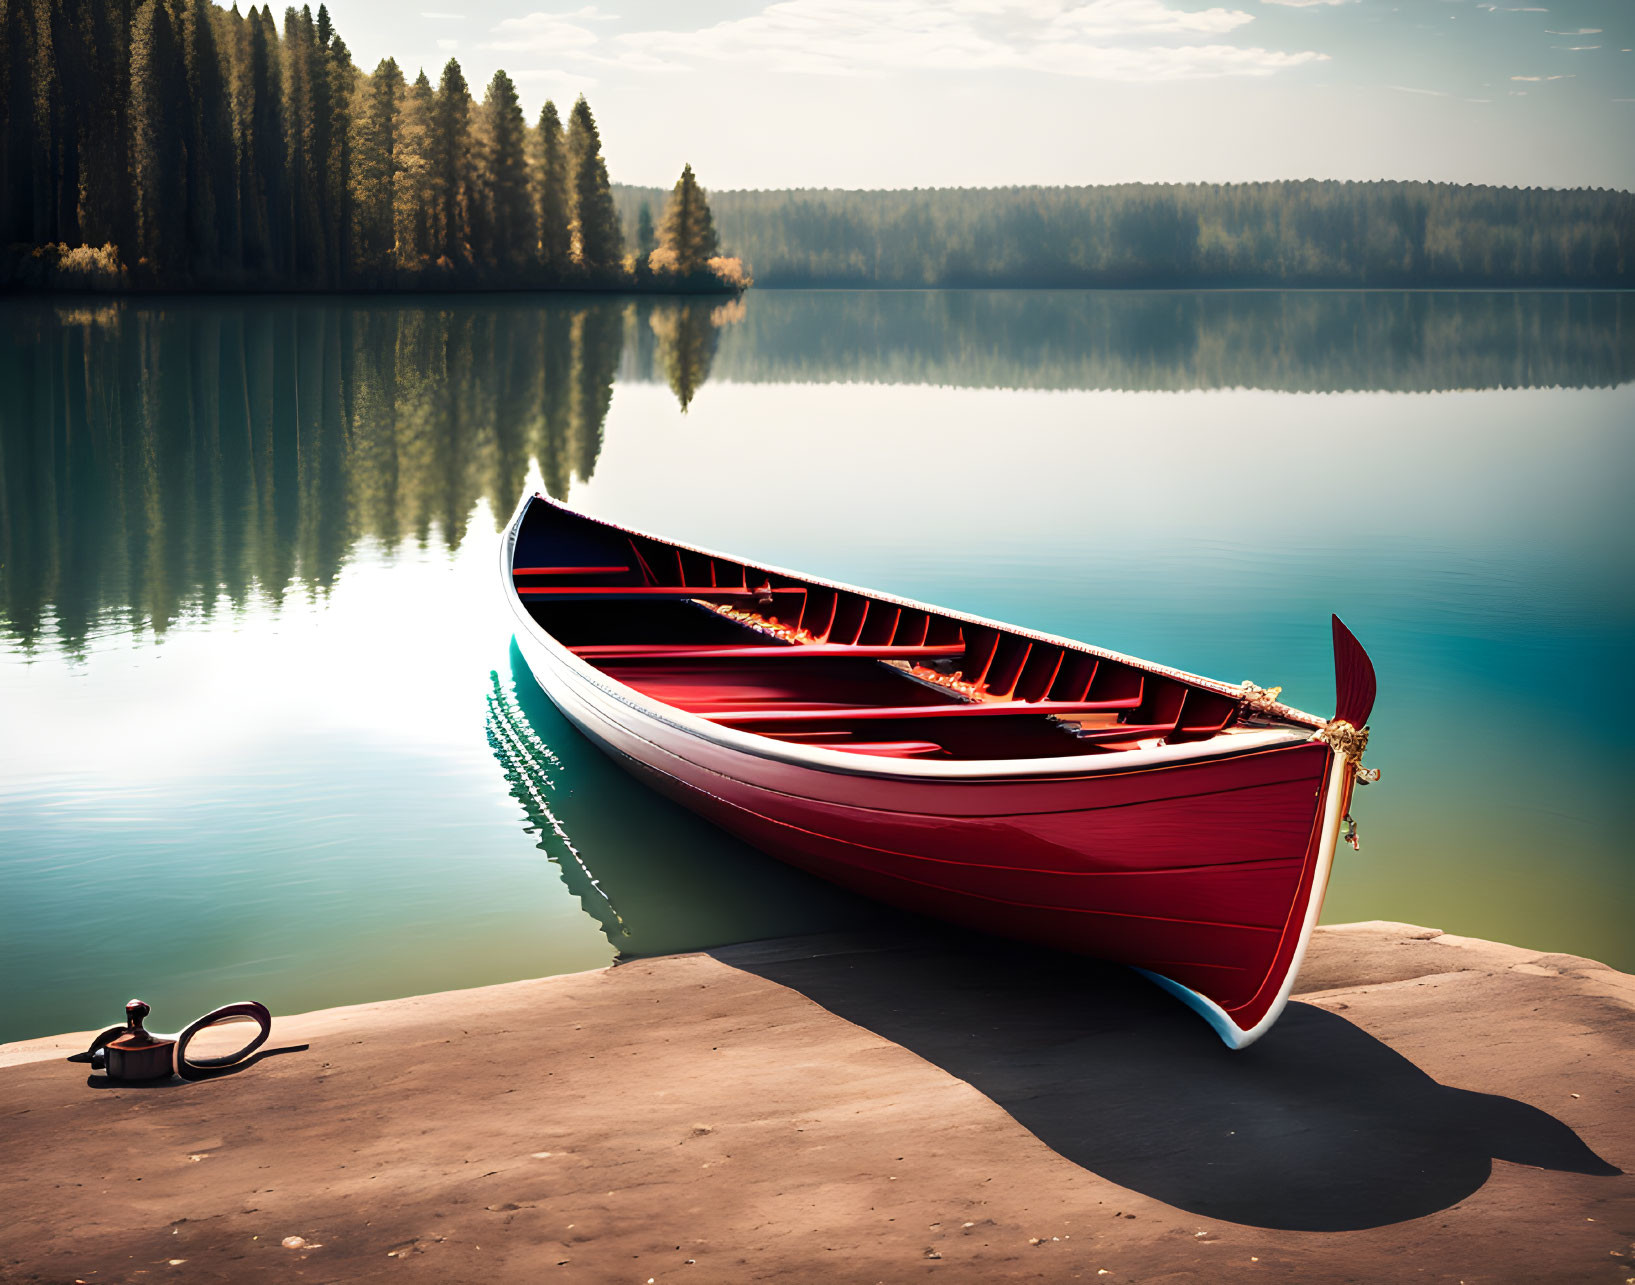 Scenic red canoe on calm lake with pine trees and clear skies